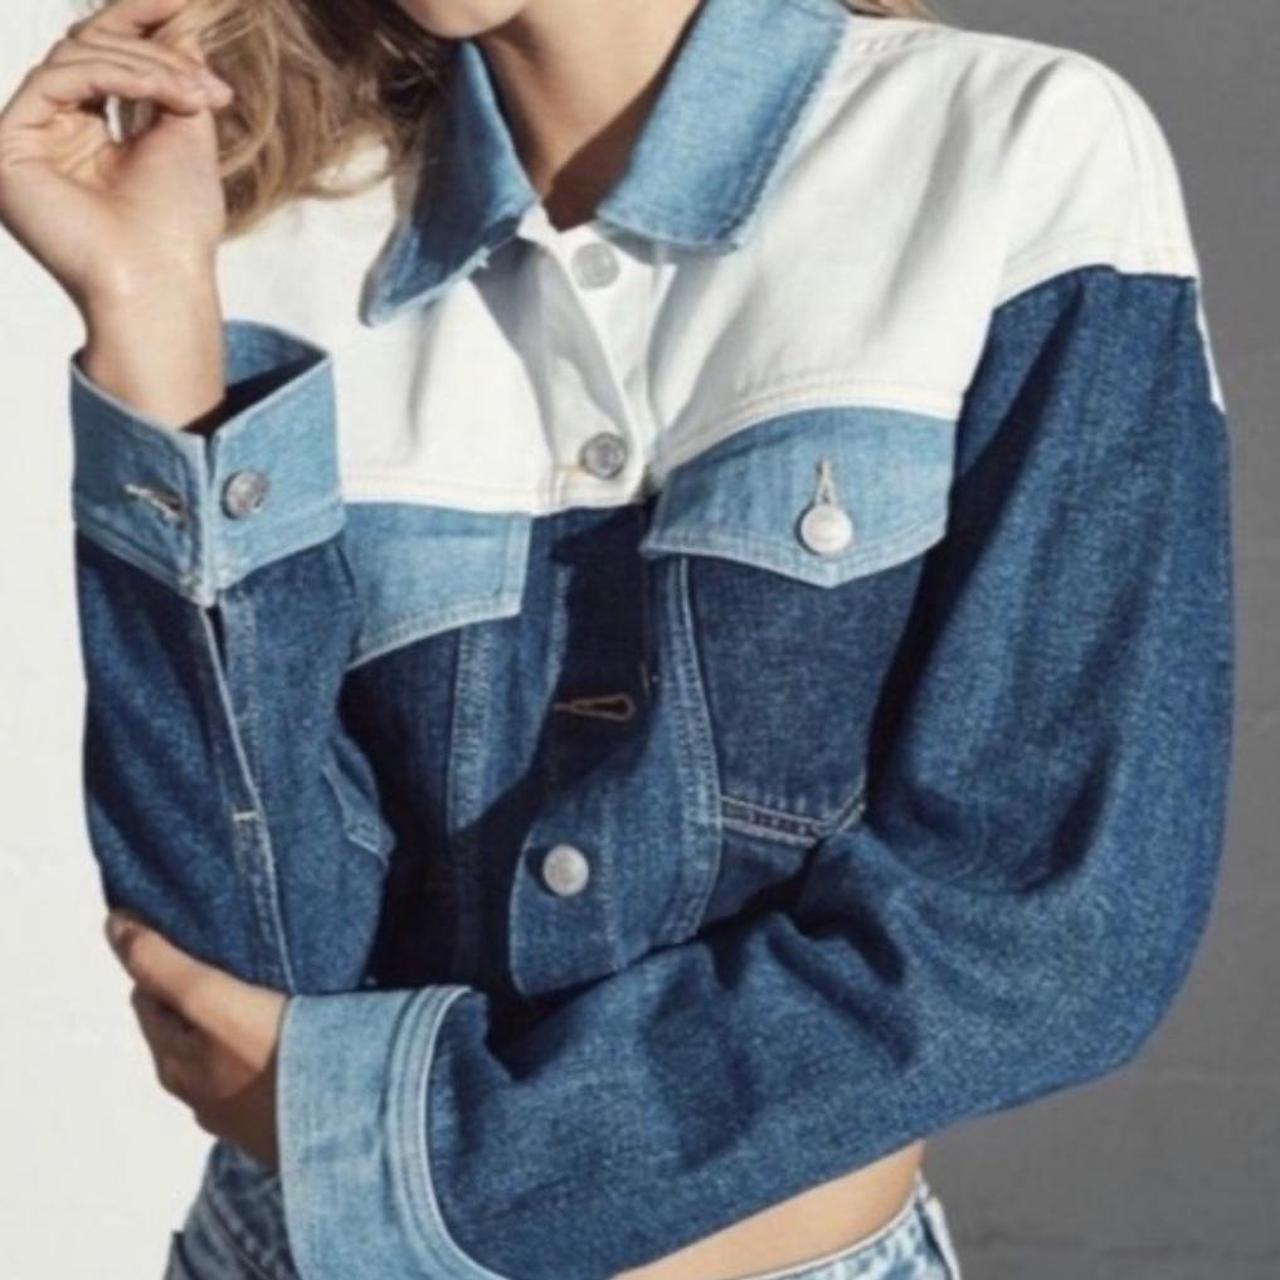 PacSun Women's White and Blue Jacket (4)